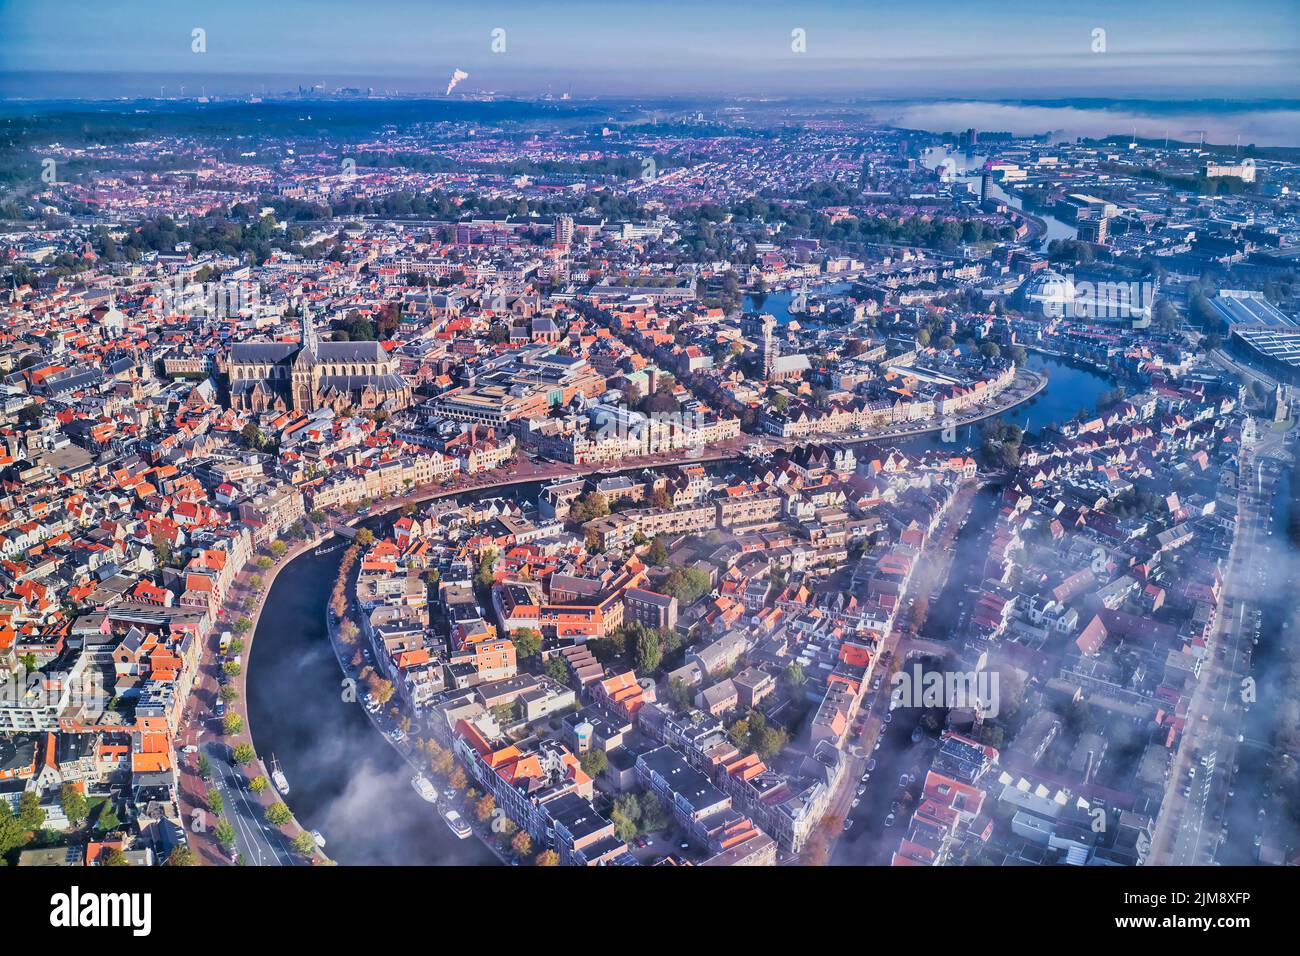 Netherlands, Haarlem - 20-06-2021: view from high above on the city of Haarlem Stock Photo